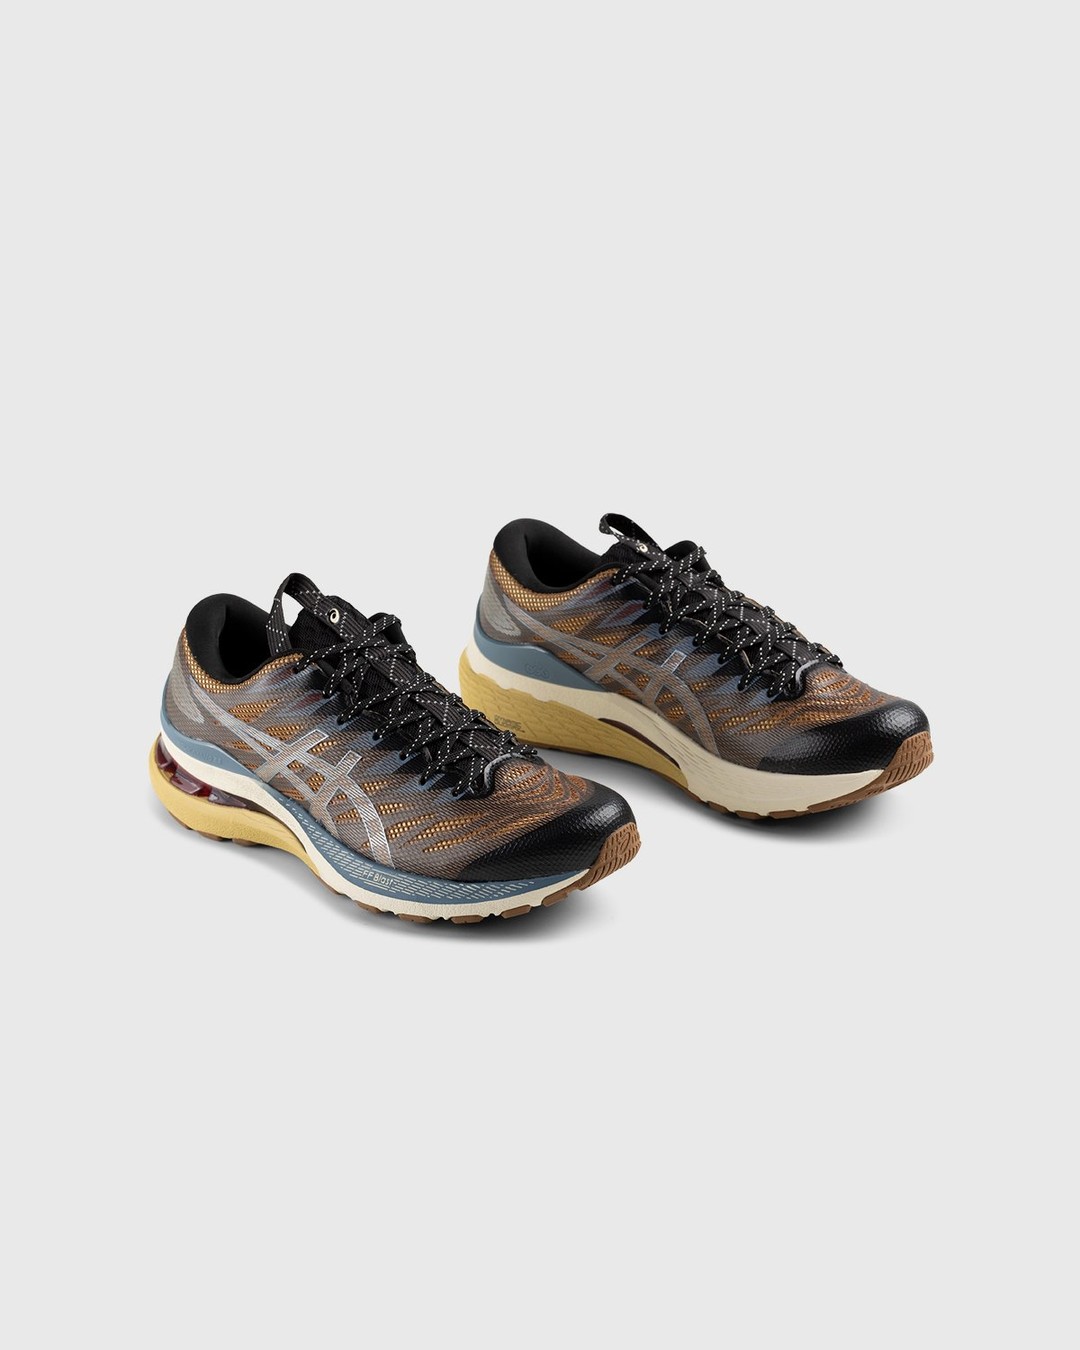 asics – FN3-S Gel Kayano 28 Anthracite/ Antique Gold - Low Top Sneakers - Yellow - Image 3